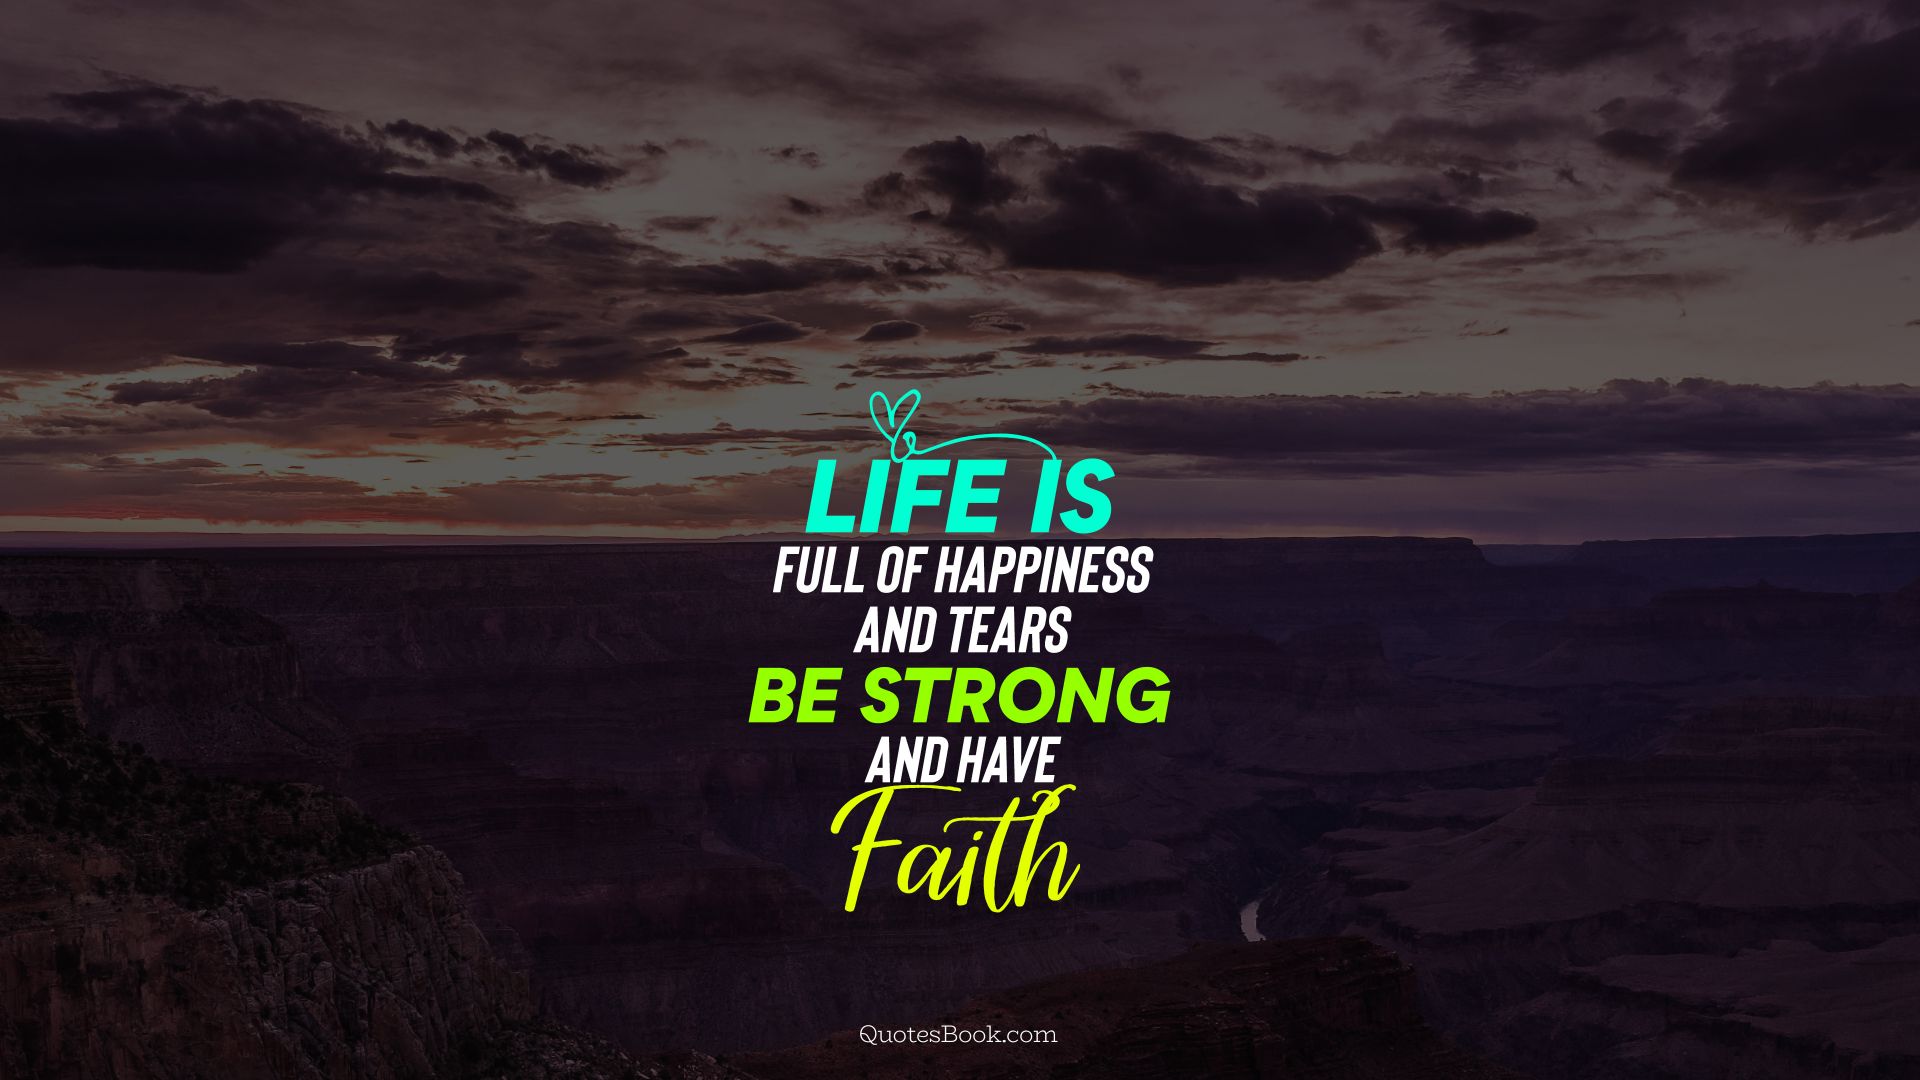 Life is full of happiness and tears be strong and have faith